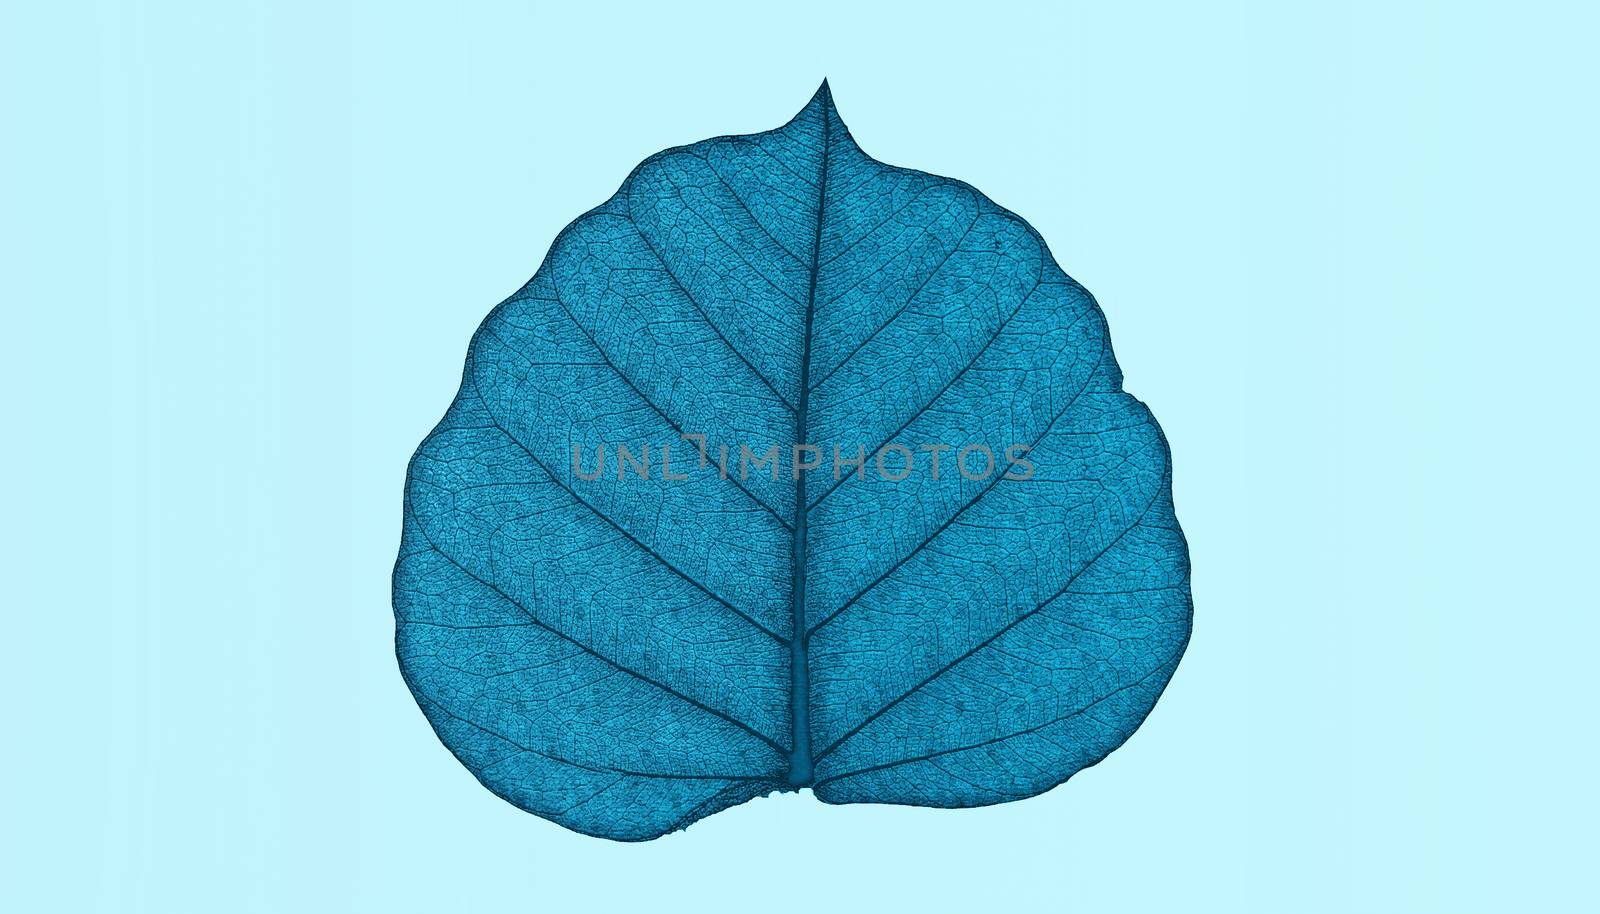 Leaf natural background concept  close-up 3d rendering by F1b0nacci